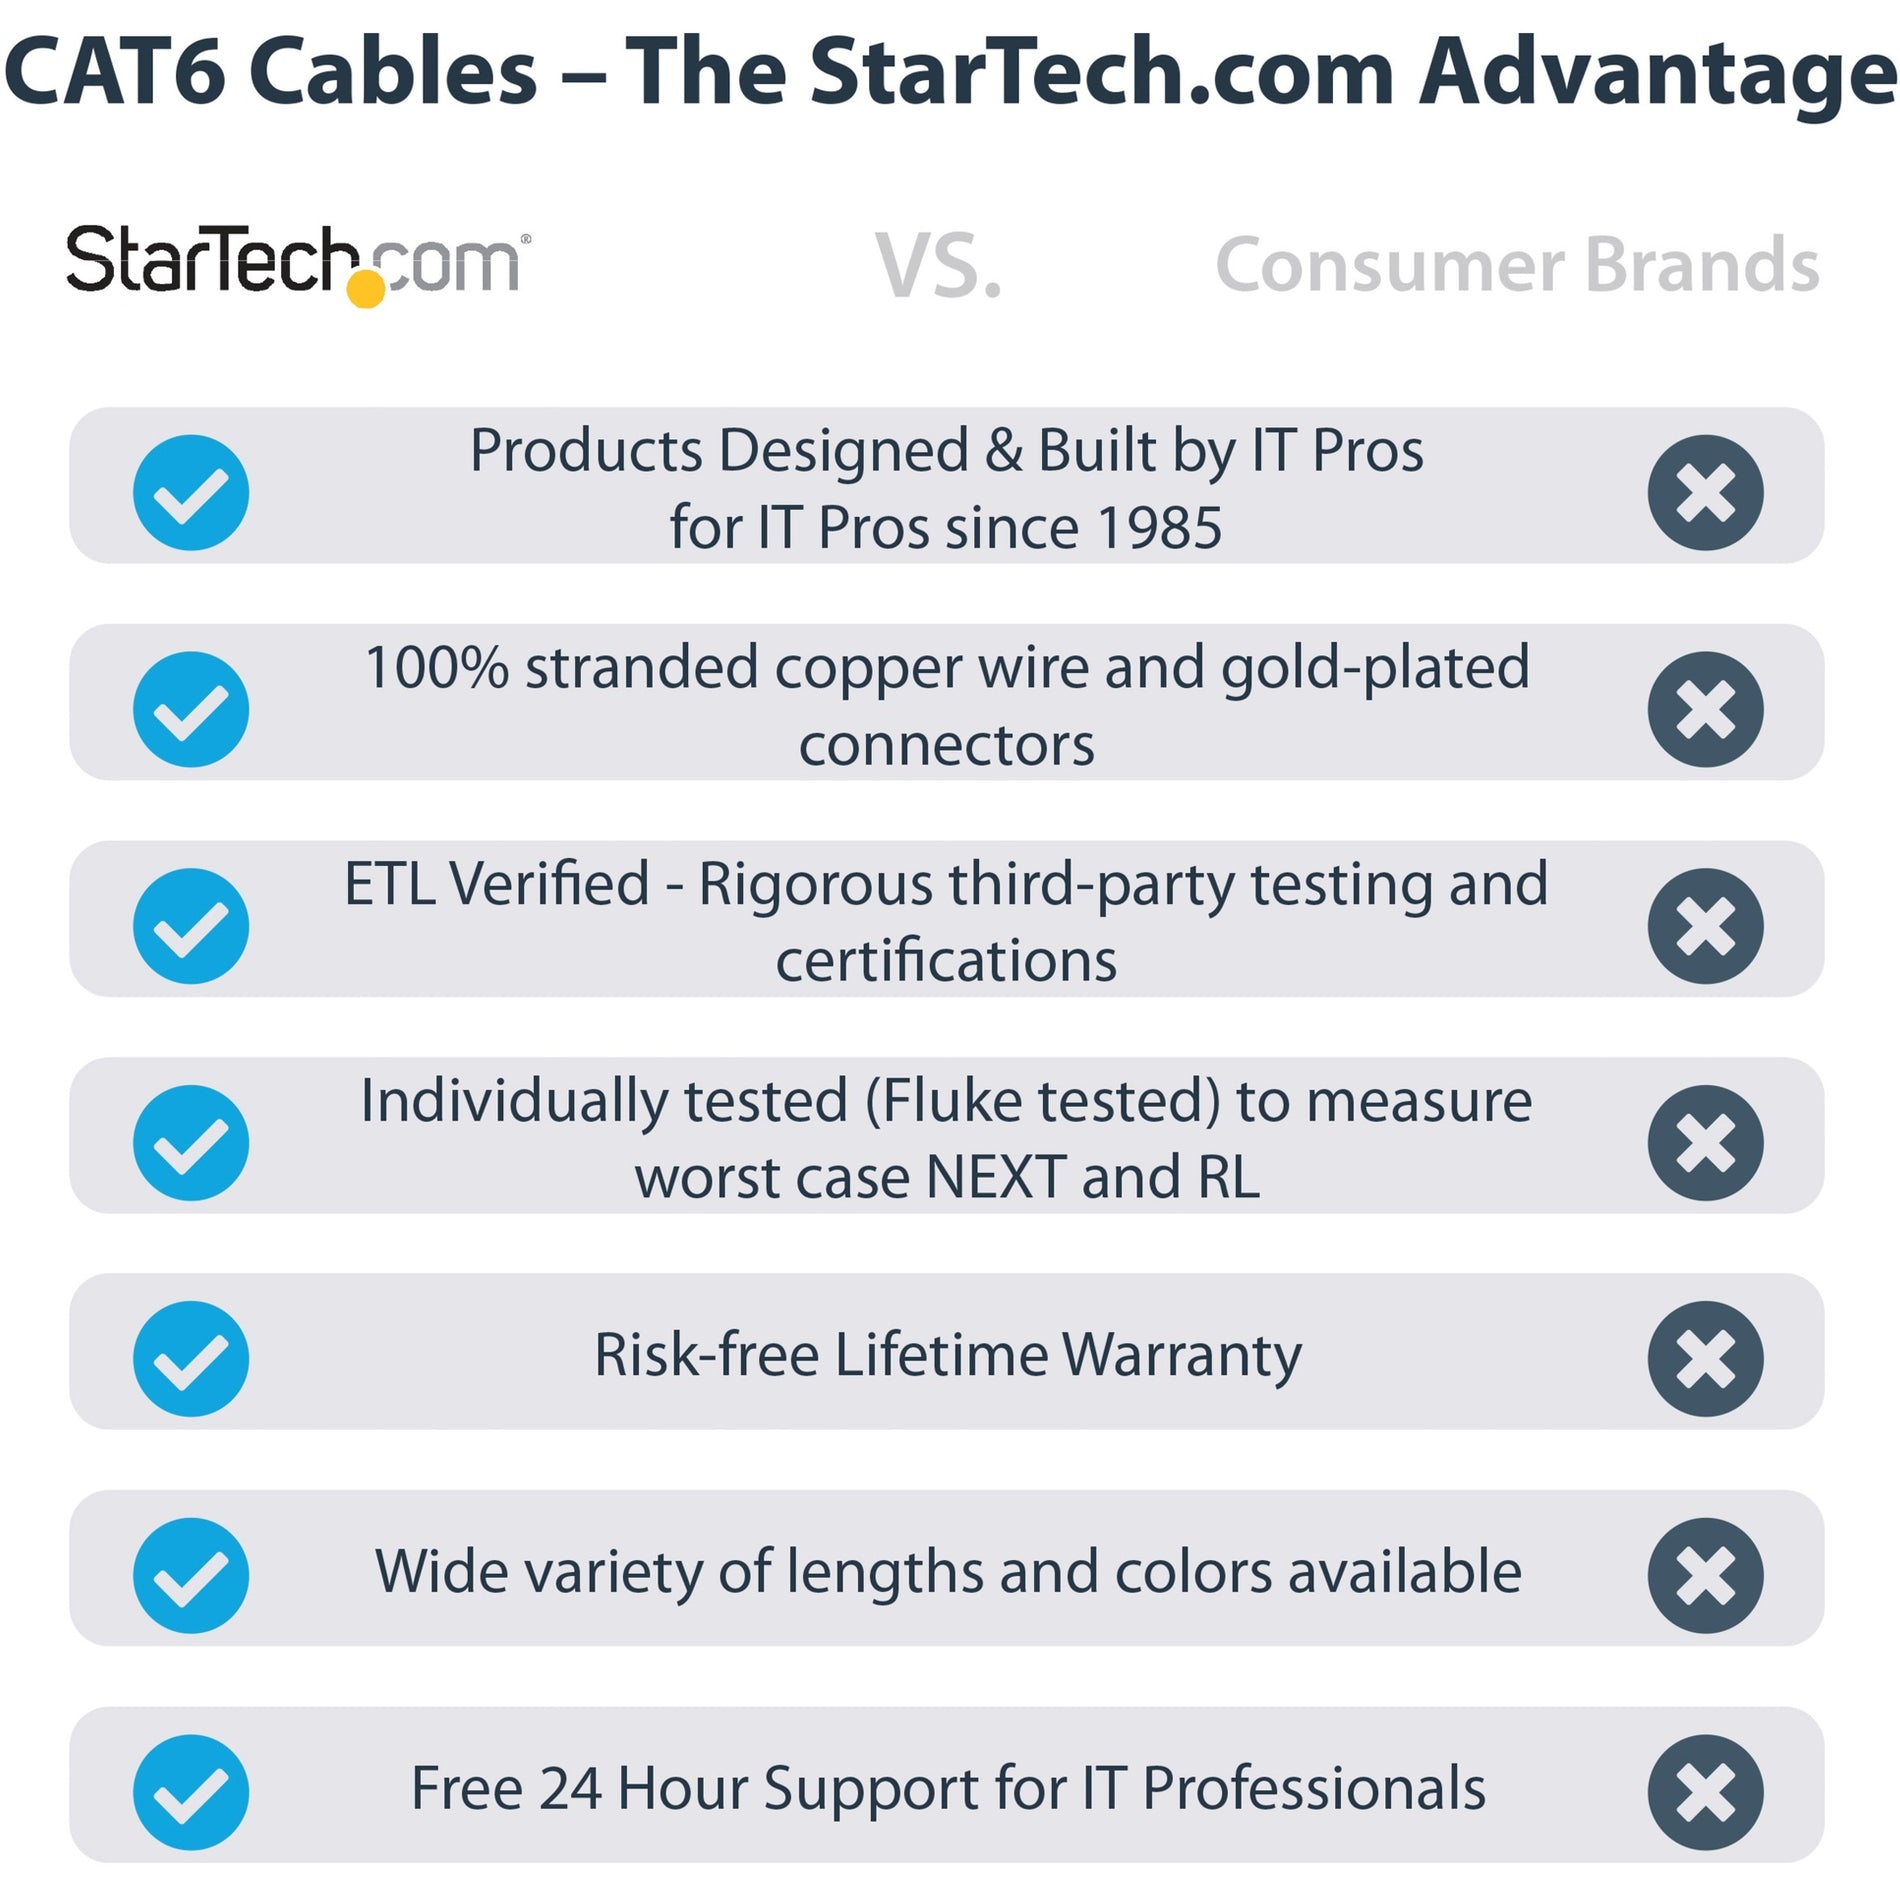 StarTech.com N6PATCH75BK 75 ft Black Snagless Cat6 UTP Patch Cable, Lifetime Warranty, Gold Connectors, Easy Cable Routing